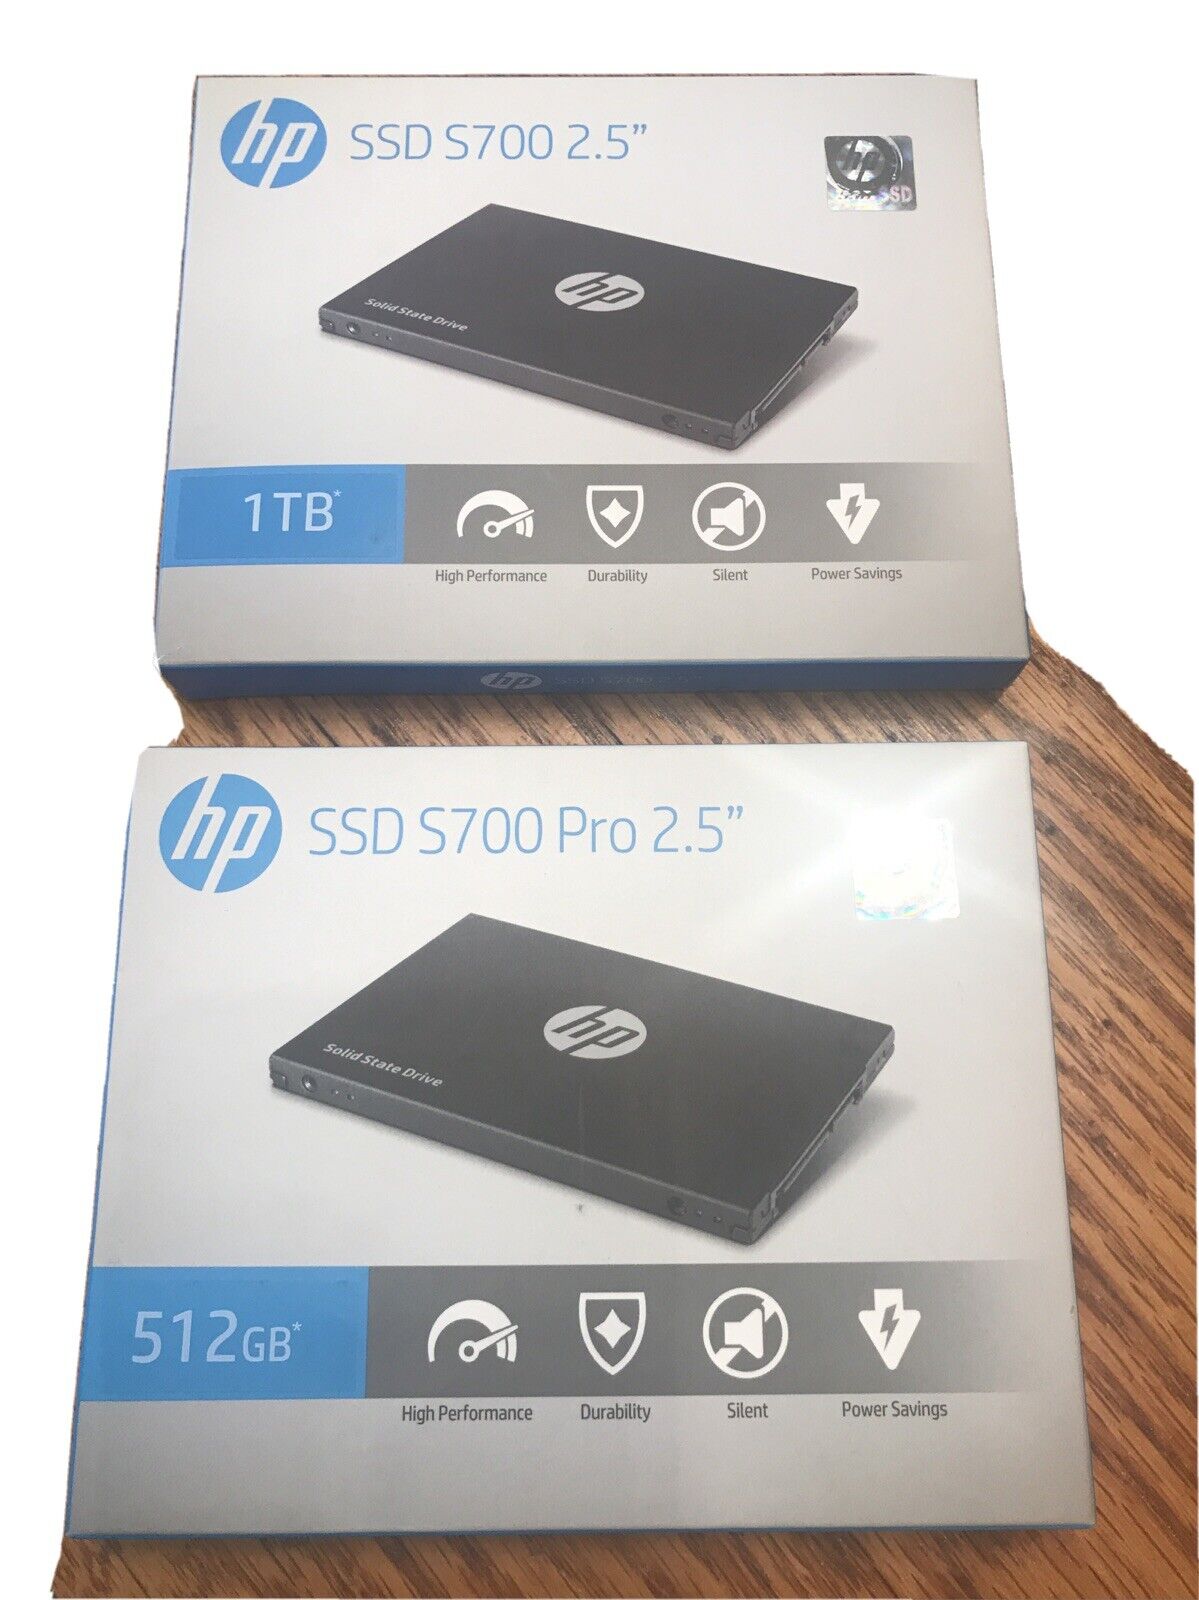 Two HP SSD S700 Pro 2.5